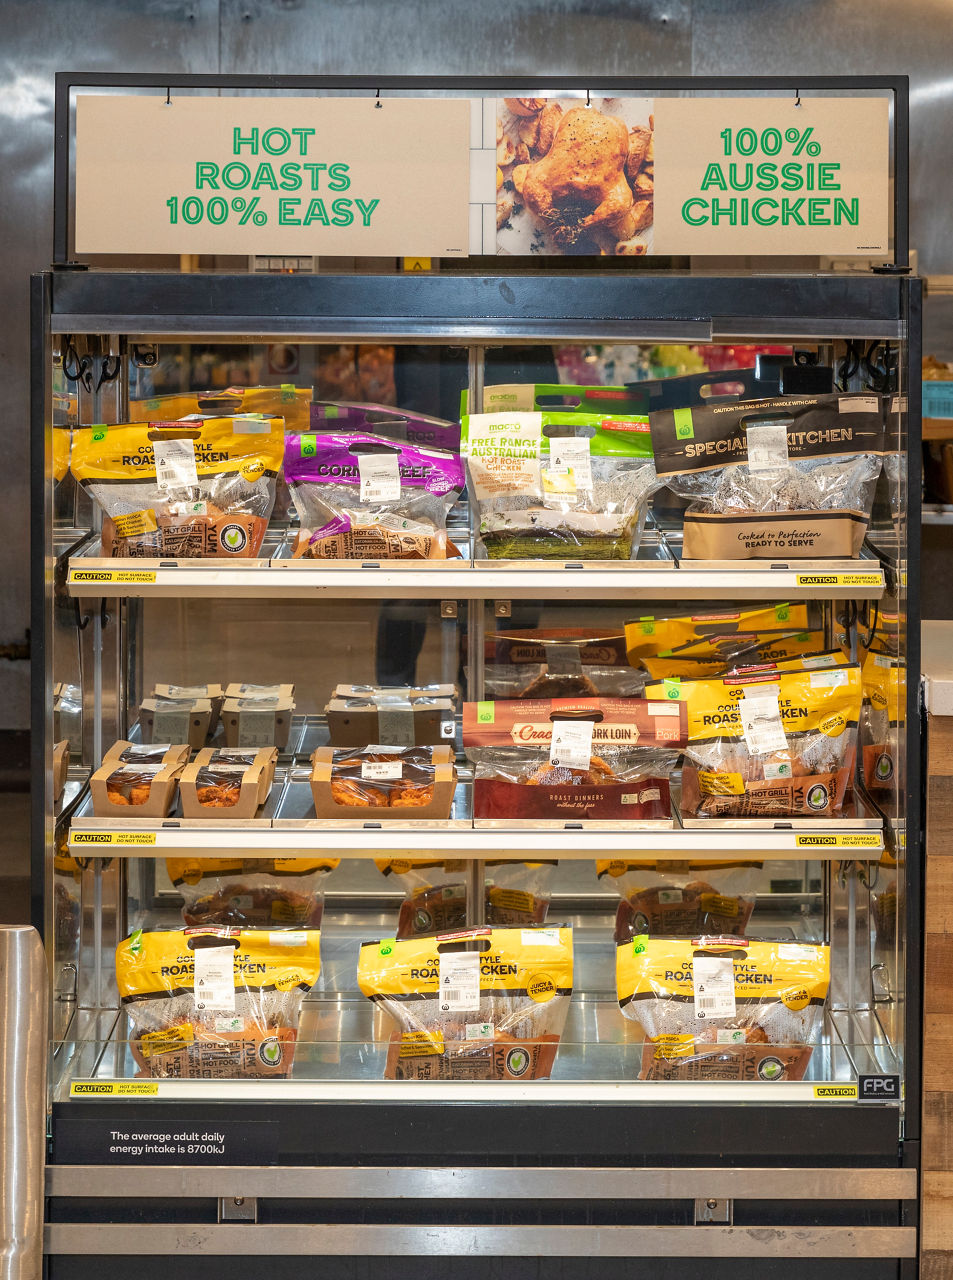 Selection of Woolworths Hot Roasted Chickens